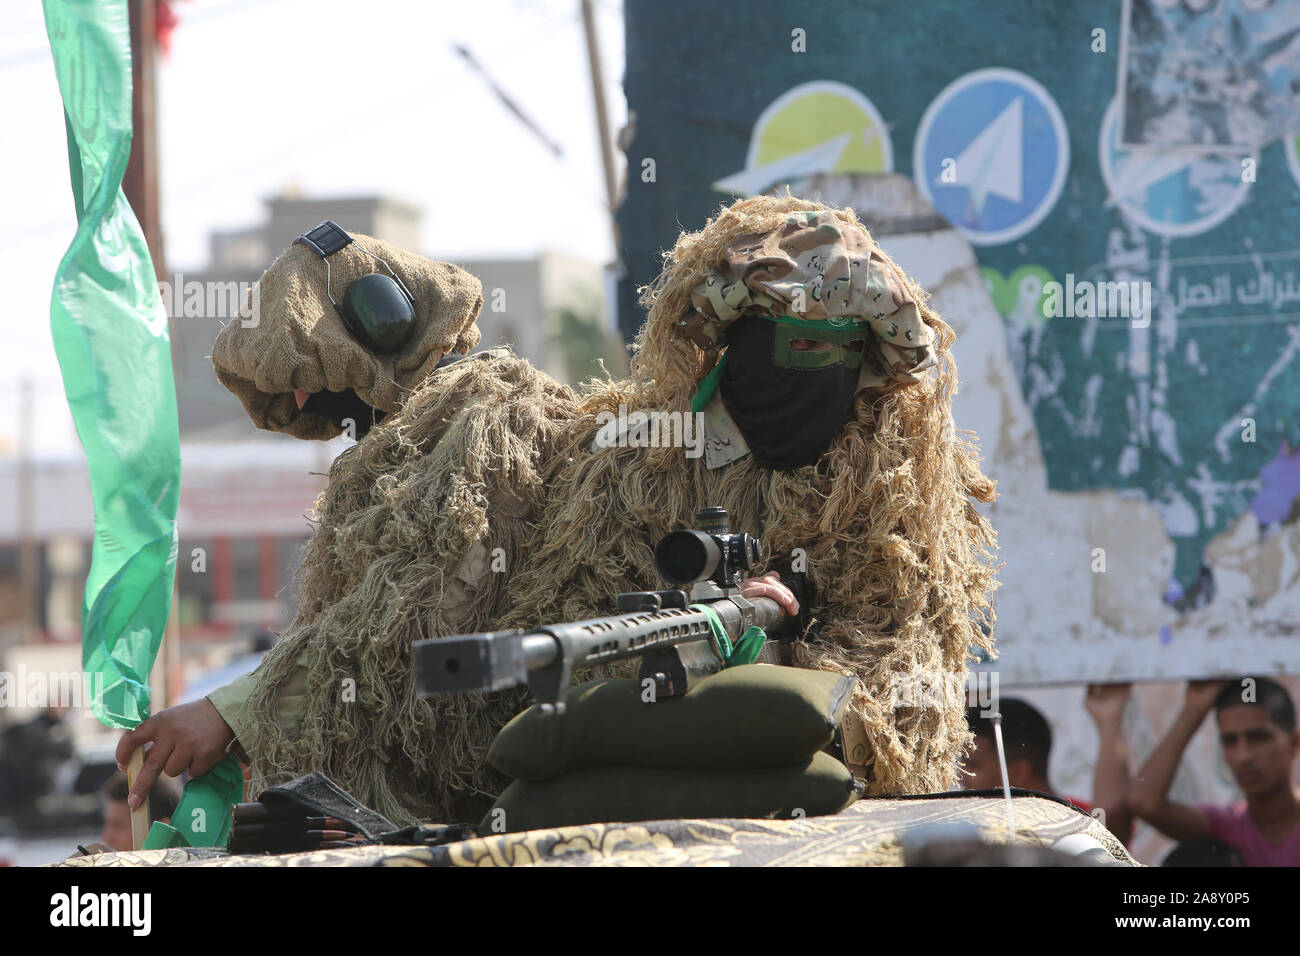 Palestinian Hamas militants take part in an anti-Israel military show in the southern Gaza Strip on Nov 11, 2019. Photo by Abed Rahim Khatib/alamy Stock Photo